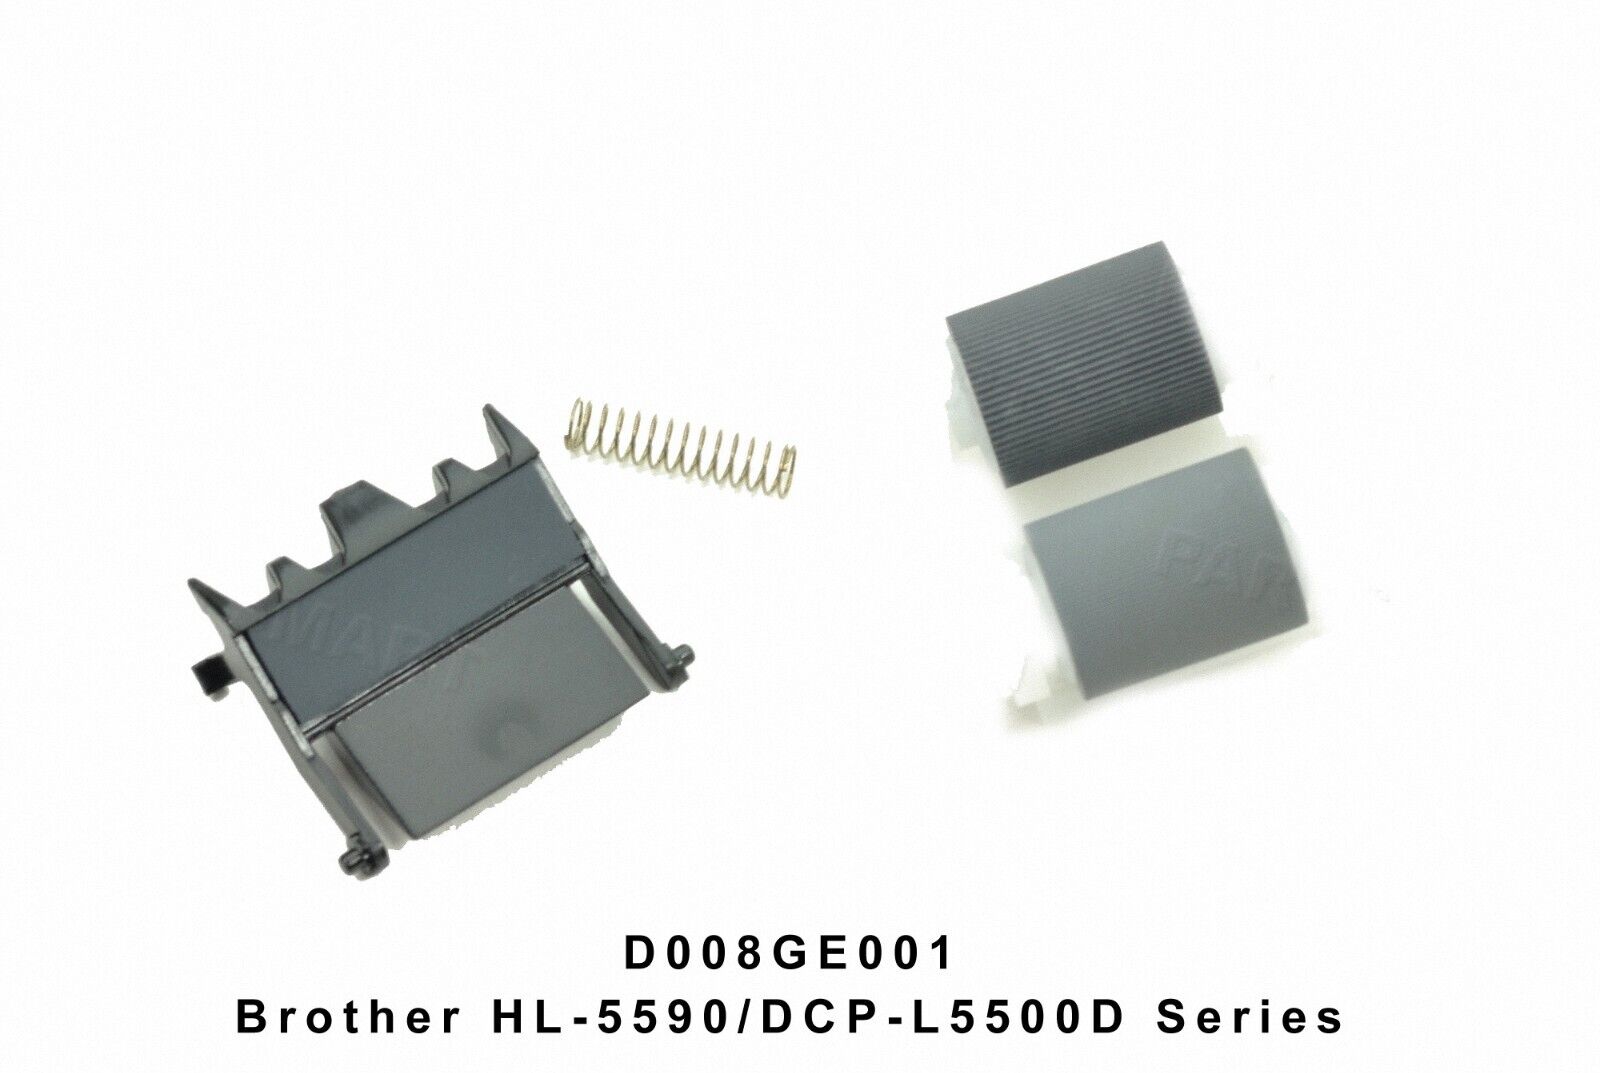 Brother HL-5590 DCP-L5500D MFC-L5700DN Paper Feed Kit D008GE001 OEM Quality